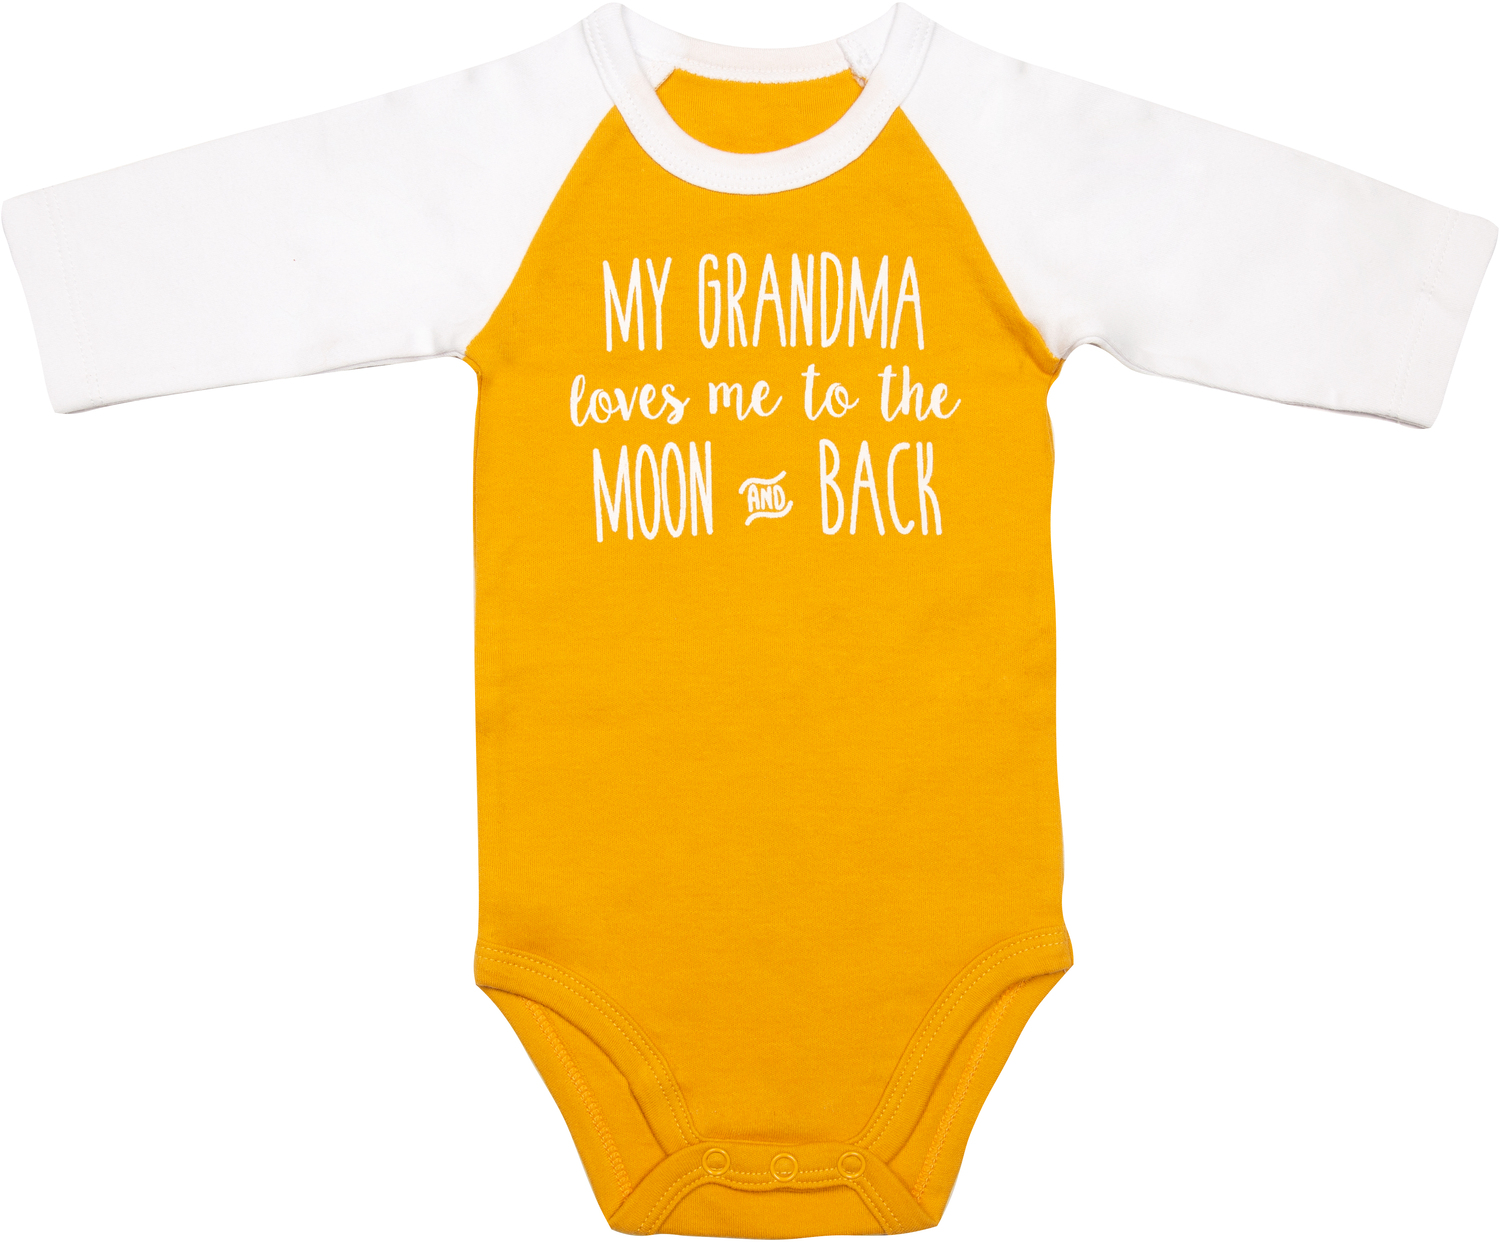 Moon and Back by Sidewalk Talk - Moon and Back - 6-12 Months
3/4 Length Sleeve Mustard Onesie